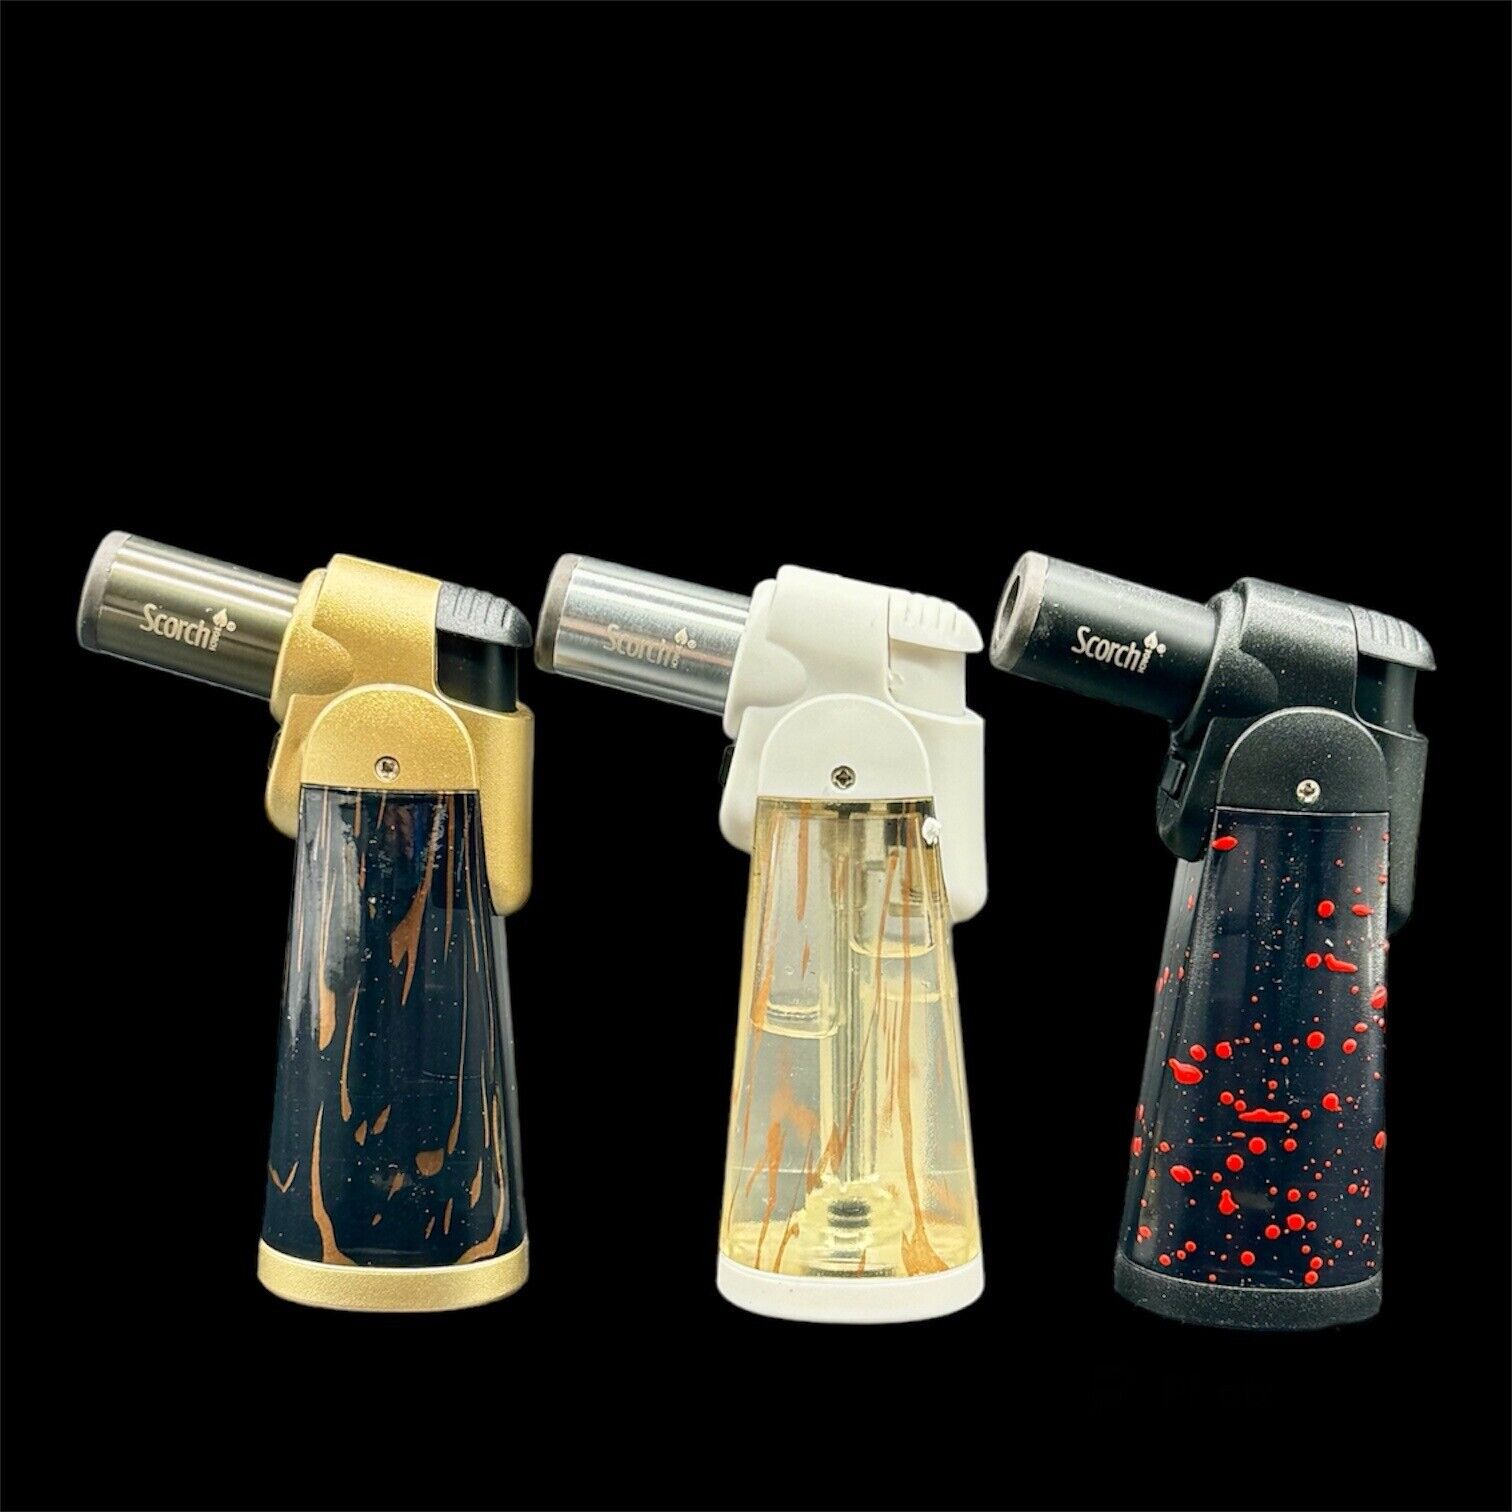 SCORCH TORCH Single Flame Butane Refillable Torch Lighter 61750